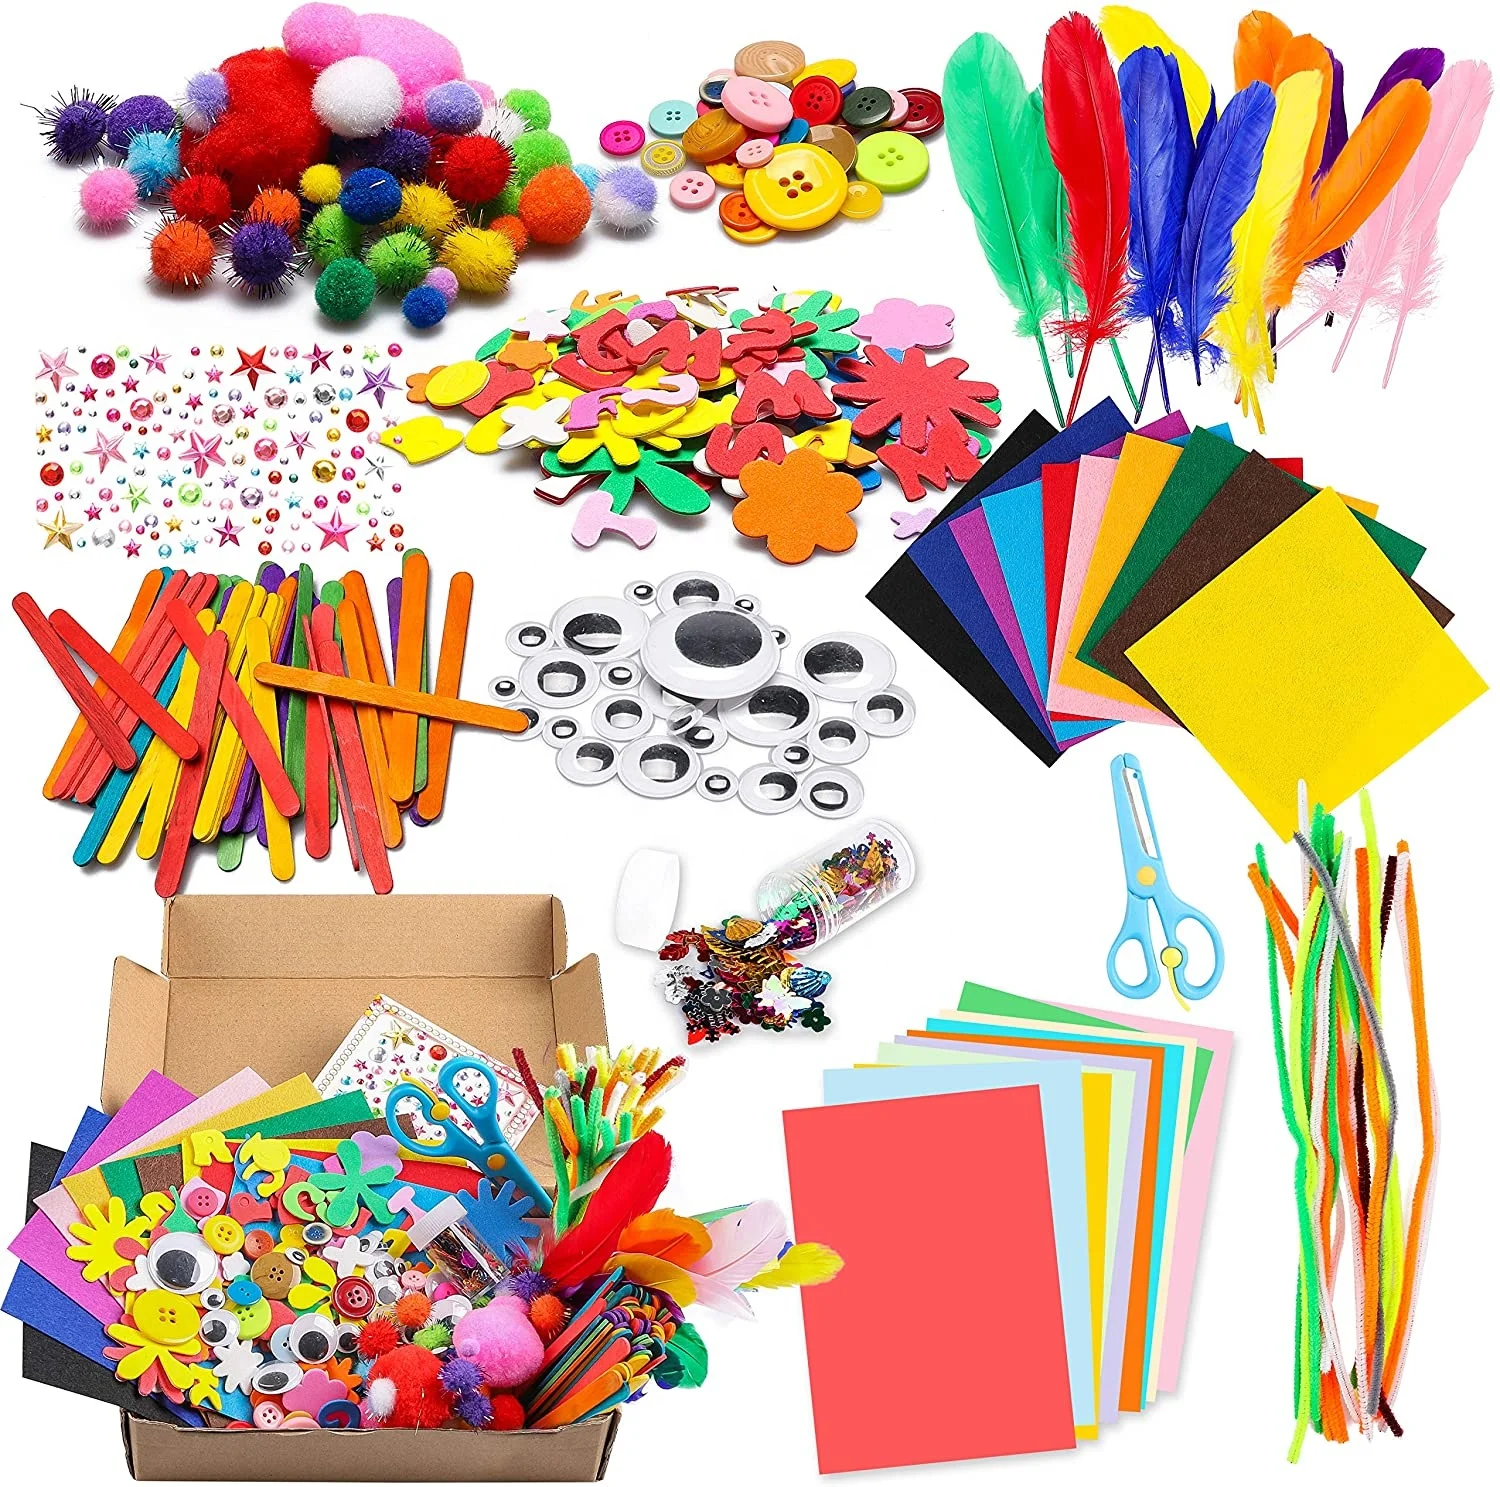 ART Craft Kit forniture per bambini PIPE CLEANERS CINIGLIA STELO Pompon 